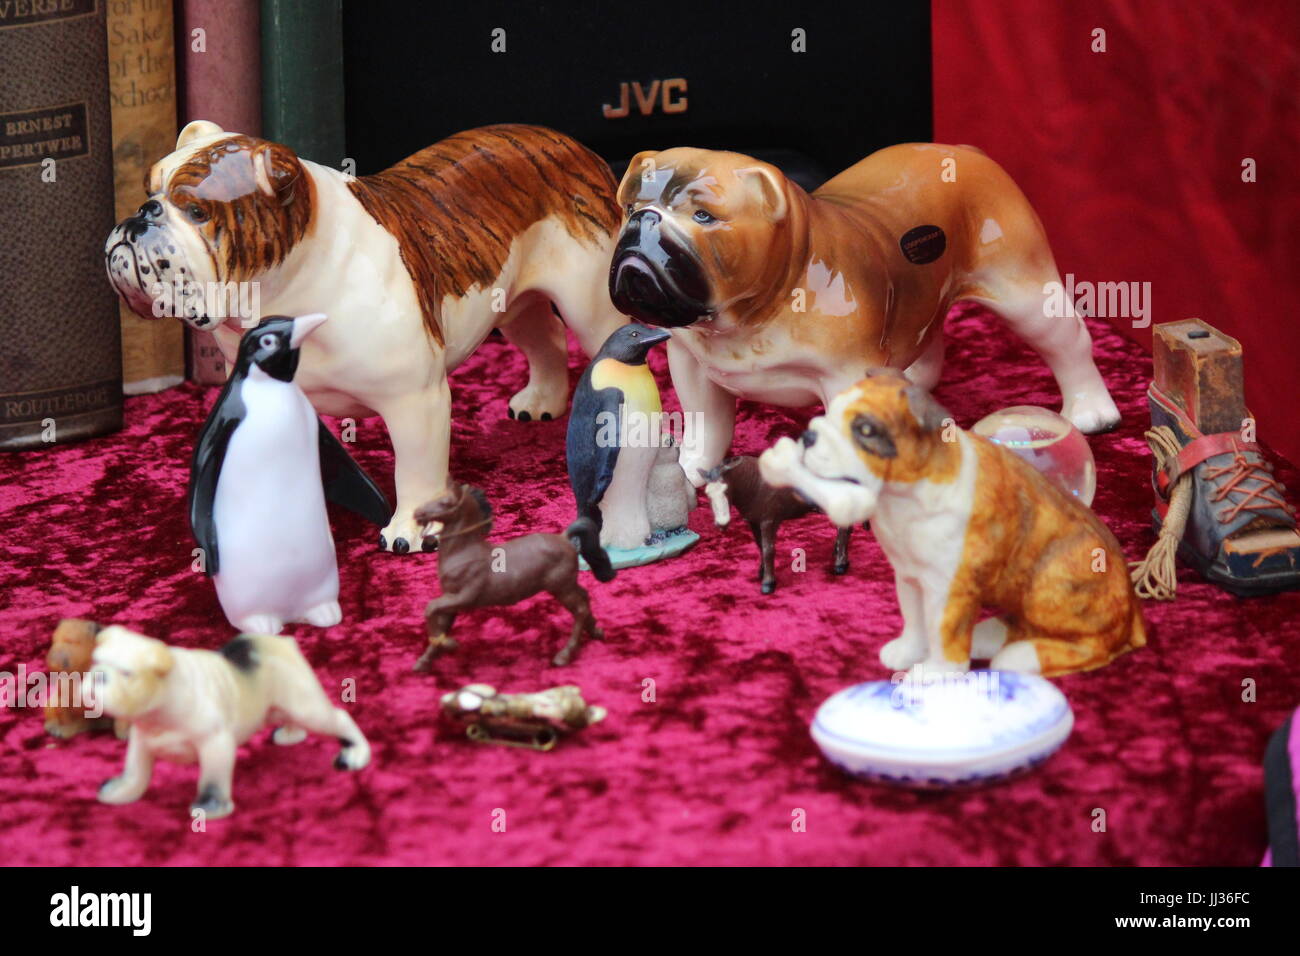 Selection of China ornaments, dogs, bulldogs and penguins displayed on red material at Portobello road market Stock Photo